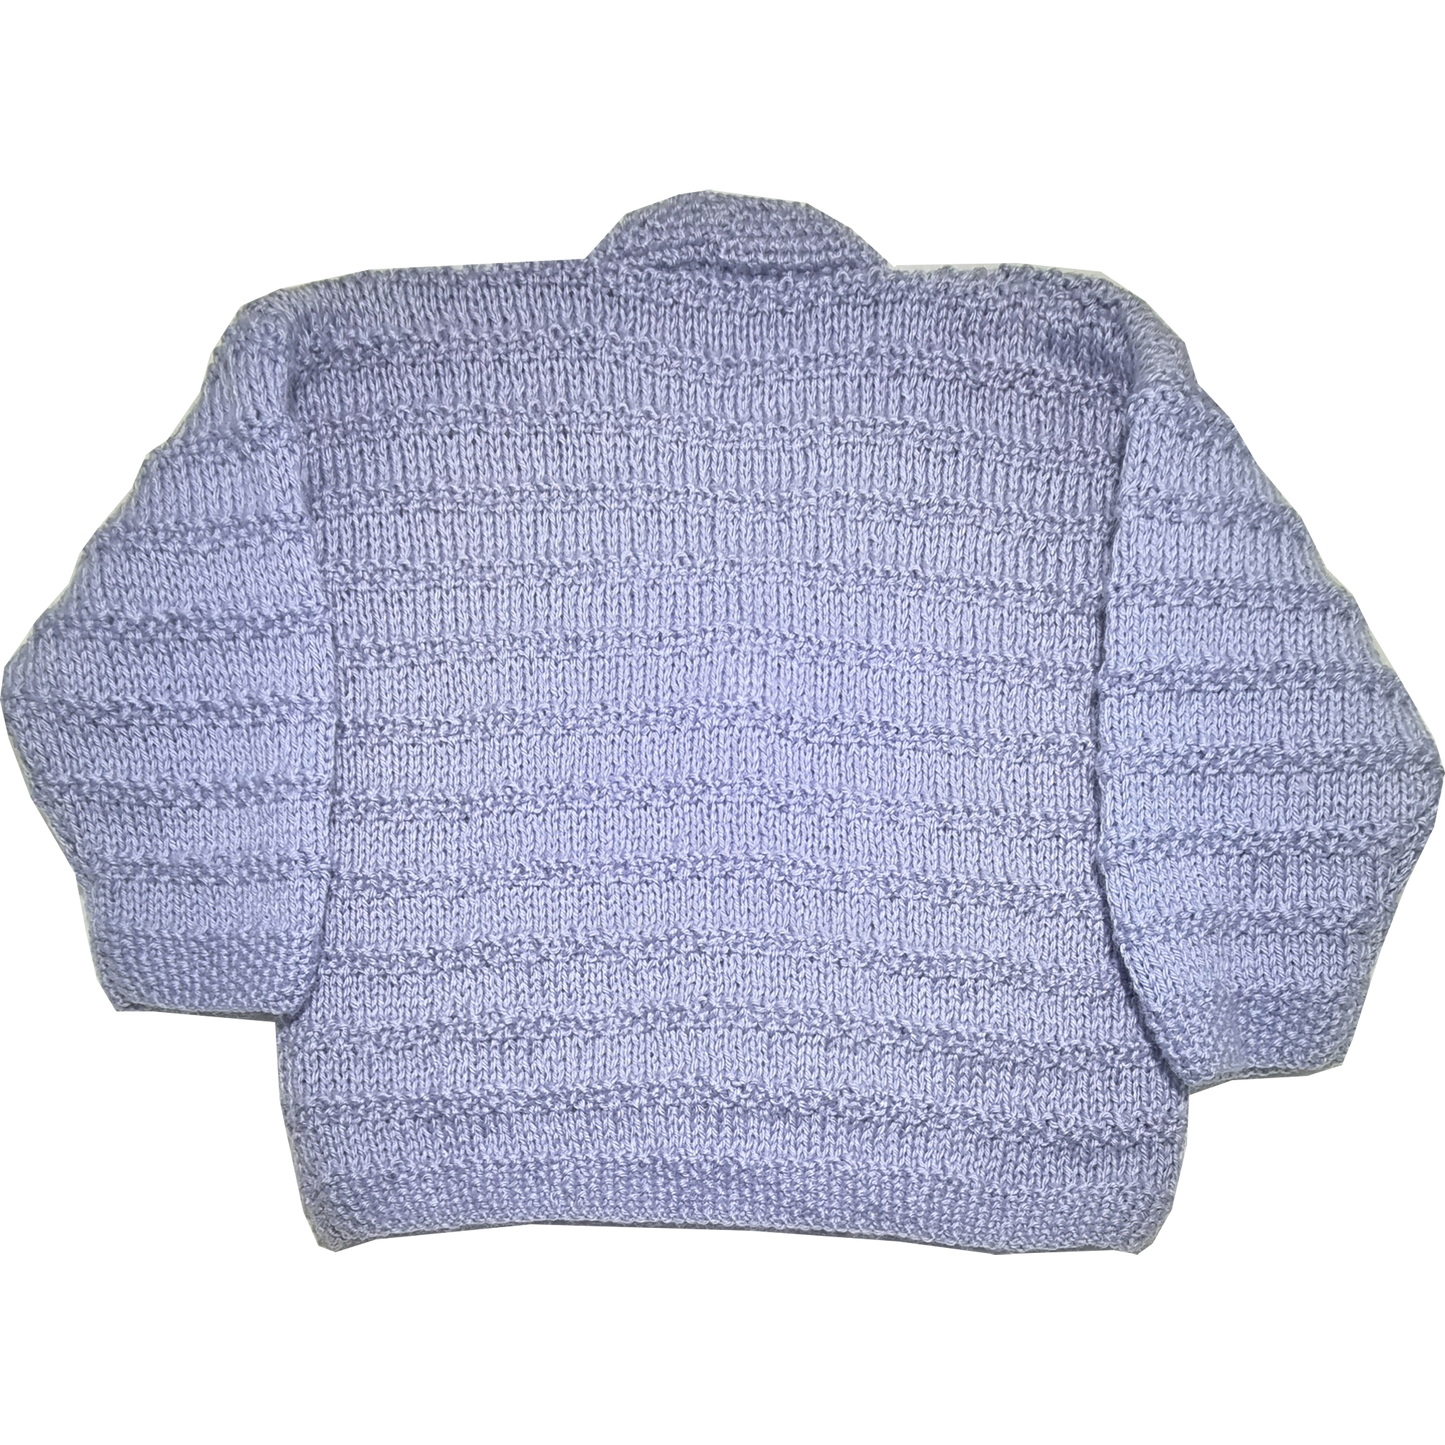 Hand Knitted Light Blue Cardigan (Approx 3-6 months)